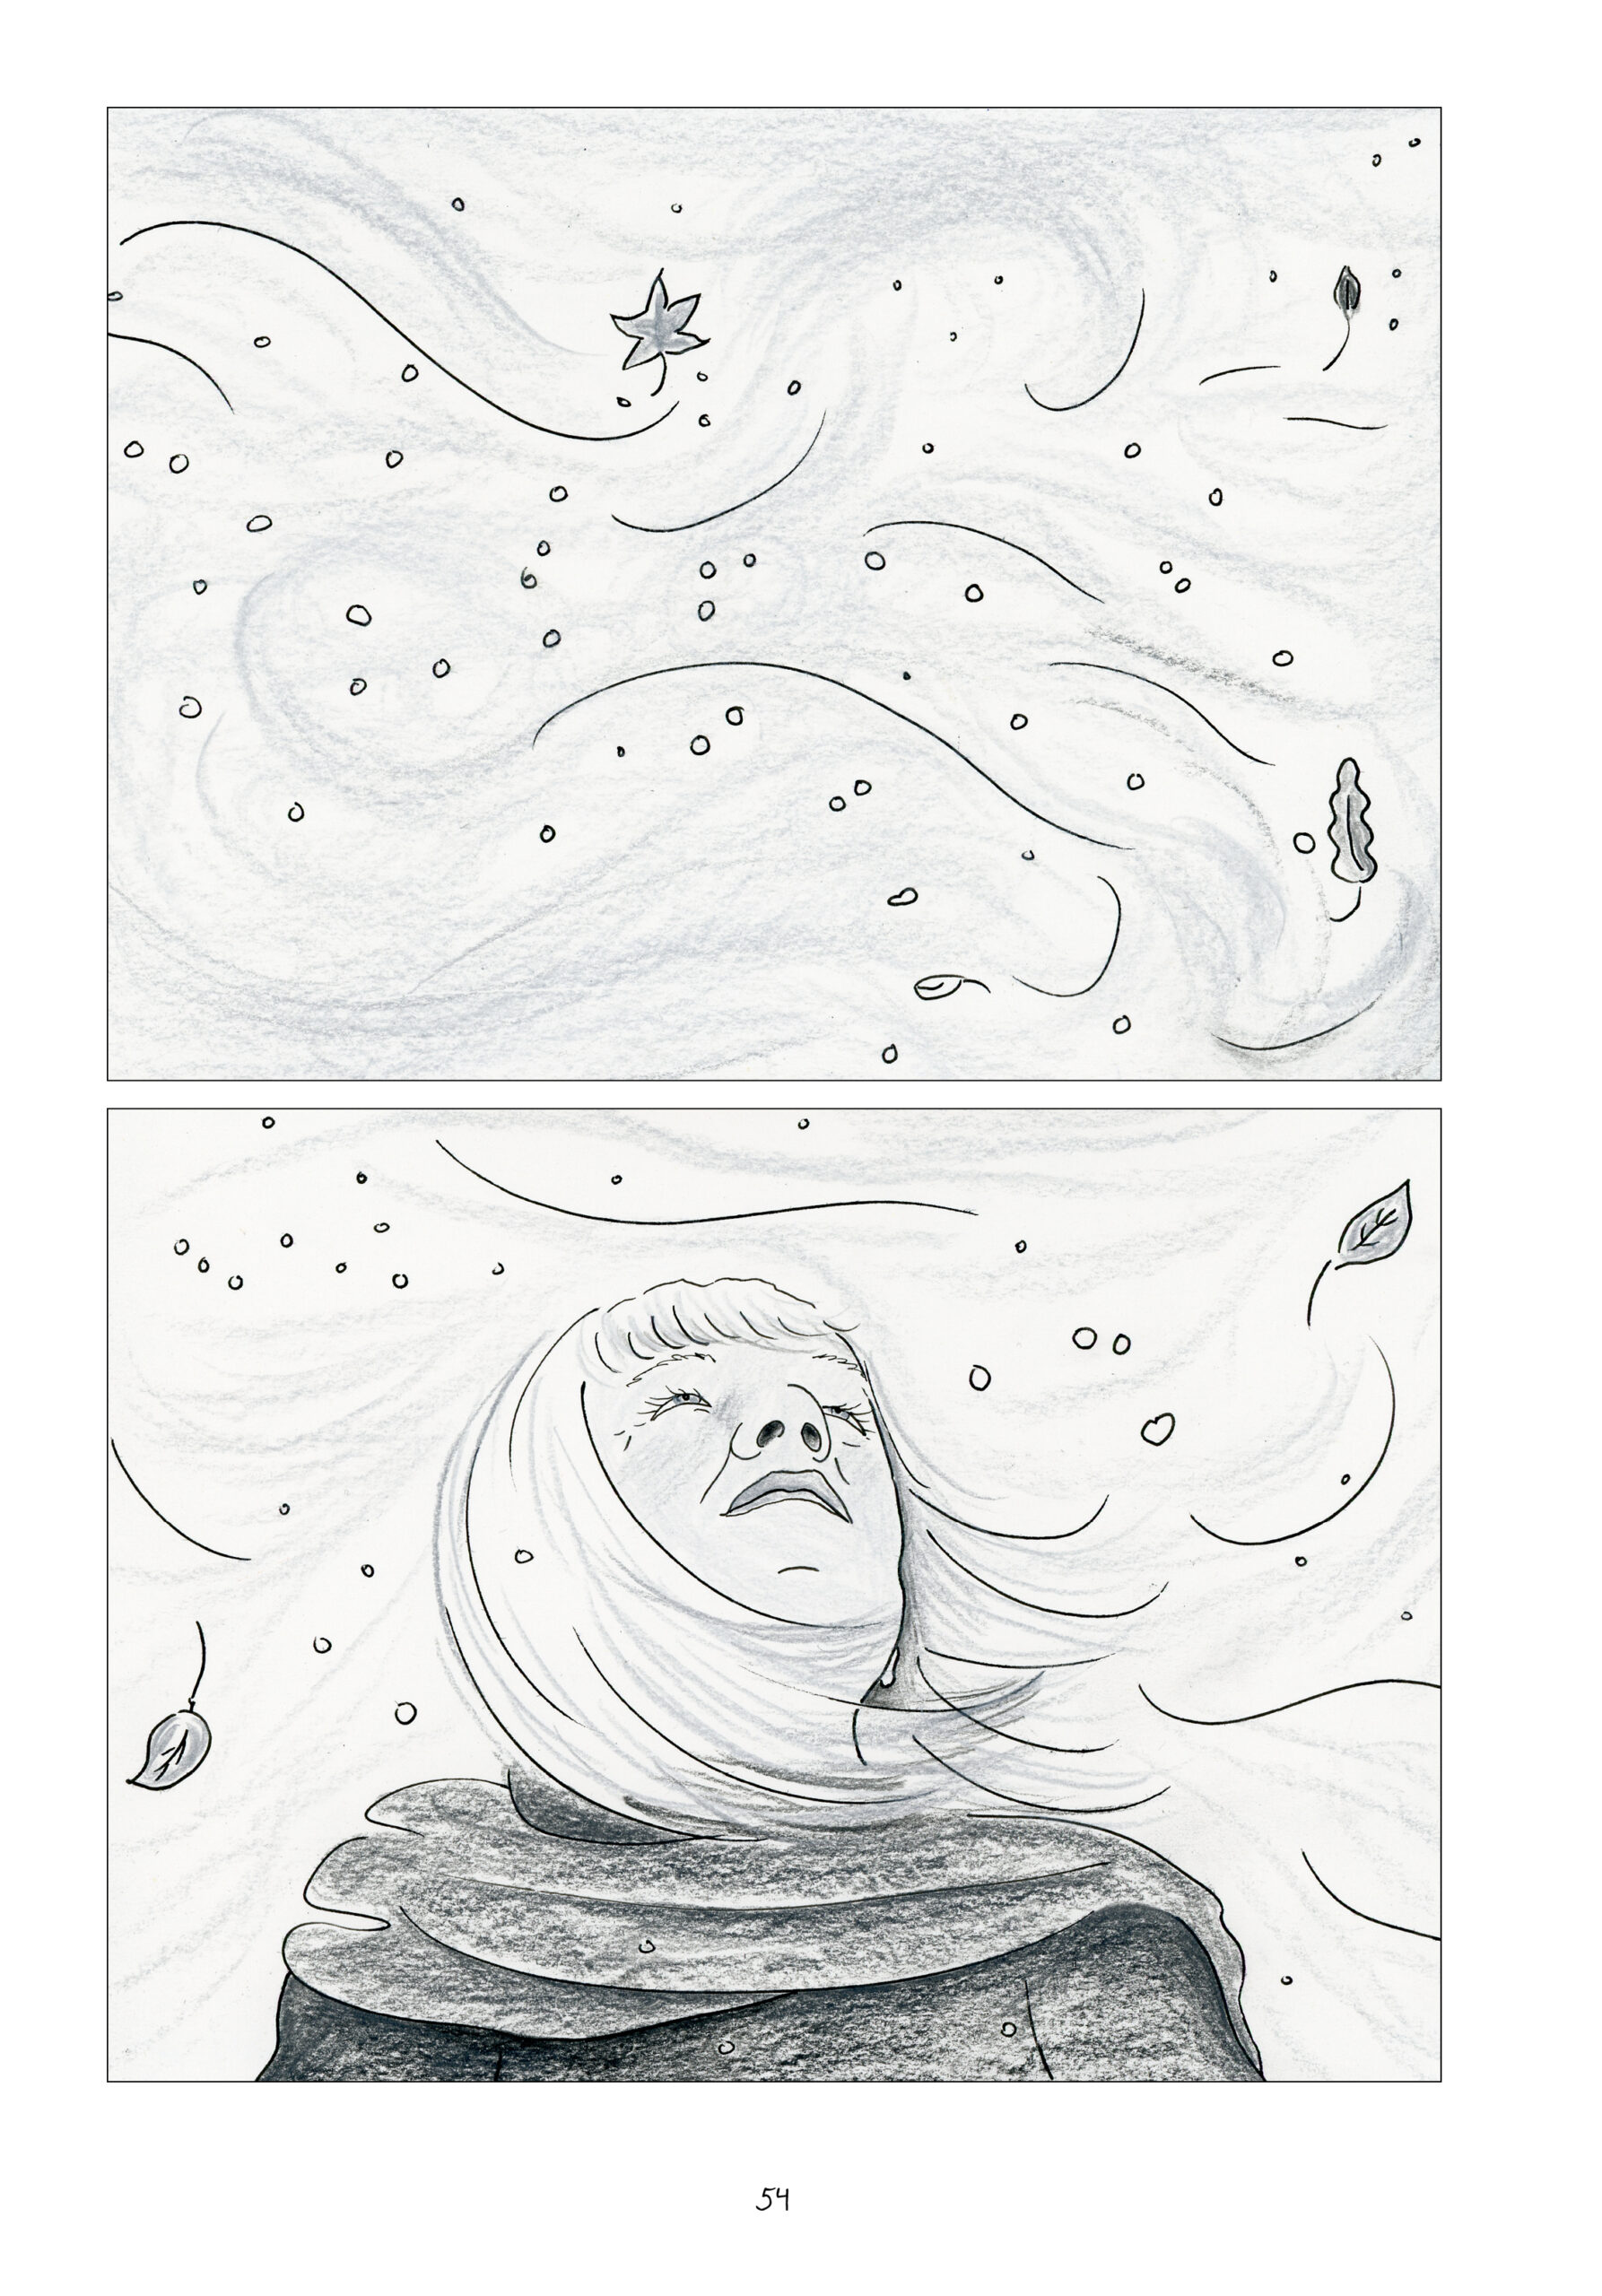 Two panels, landscape, each take up half the page. We return to the present in black and white. Wind swirls in the panels, picking up leaves and dotted by specks of snow. Adult Lynn looks up at the panel above her, with a somber expression. Her hair and scarf blow in the wind.